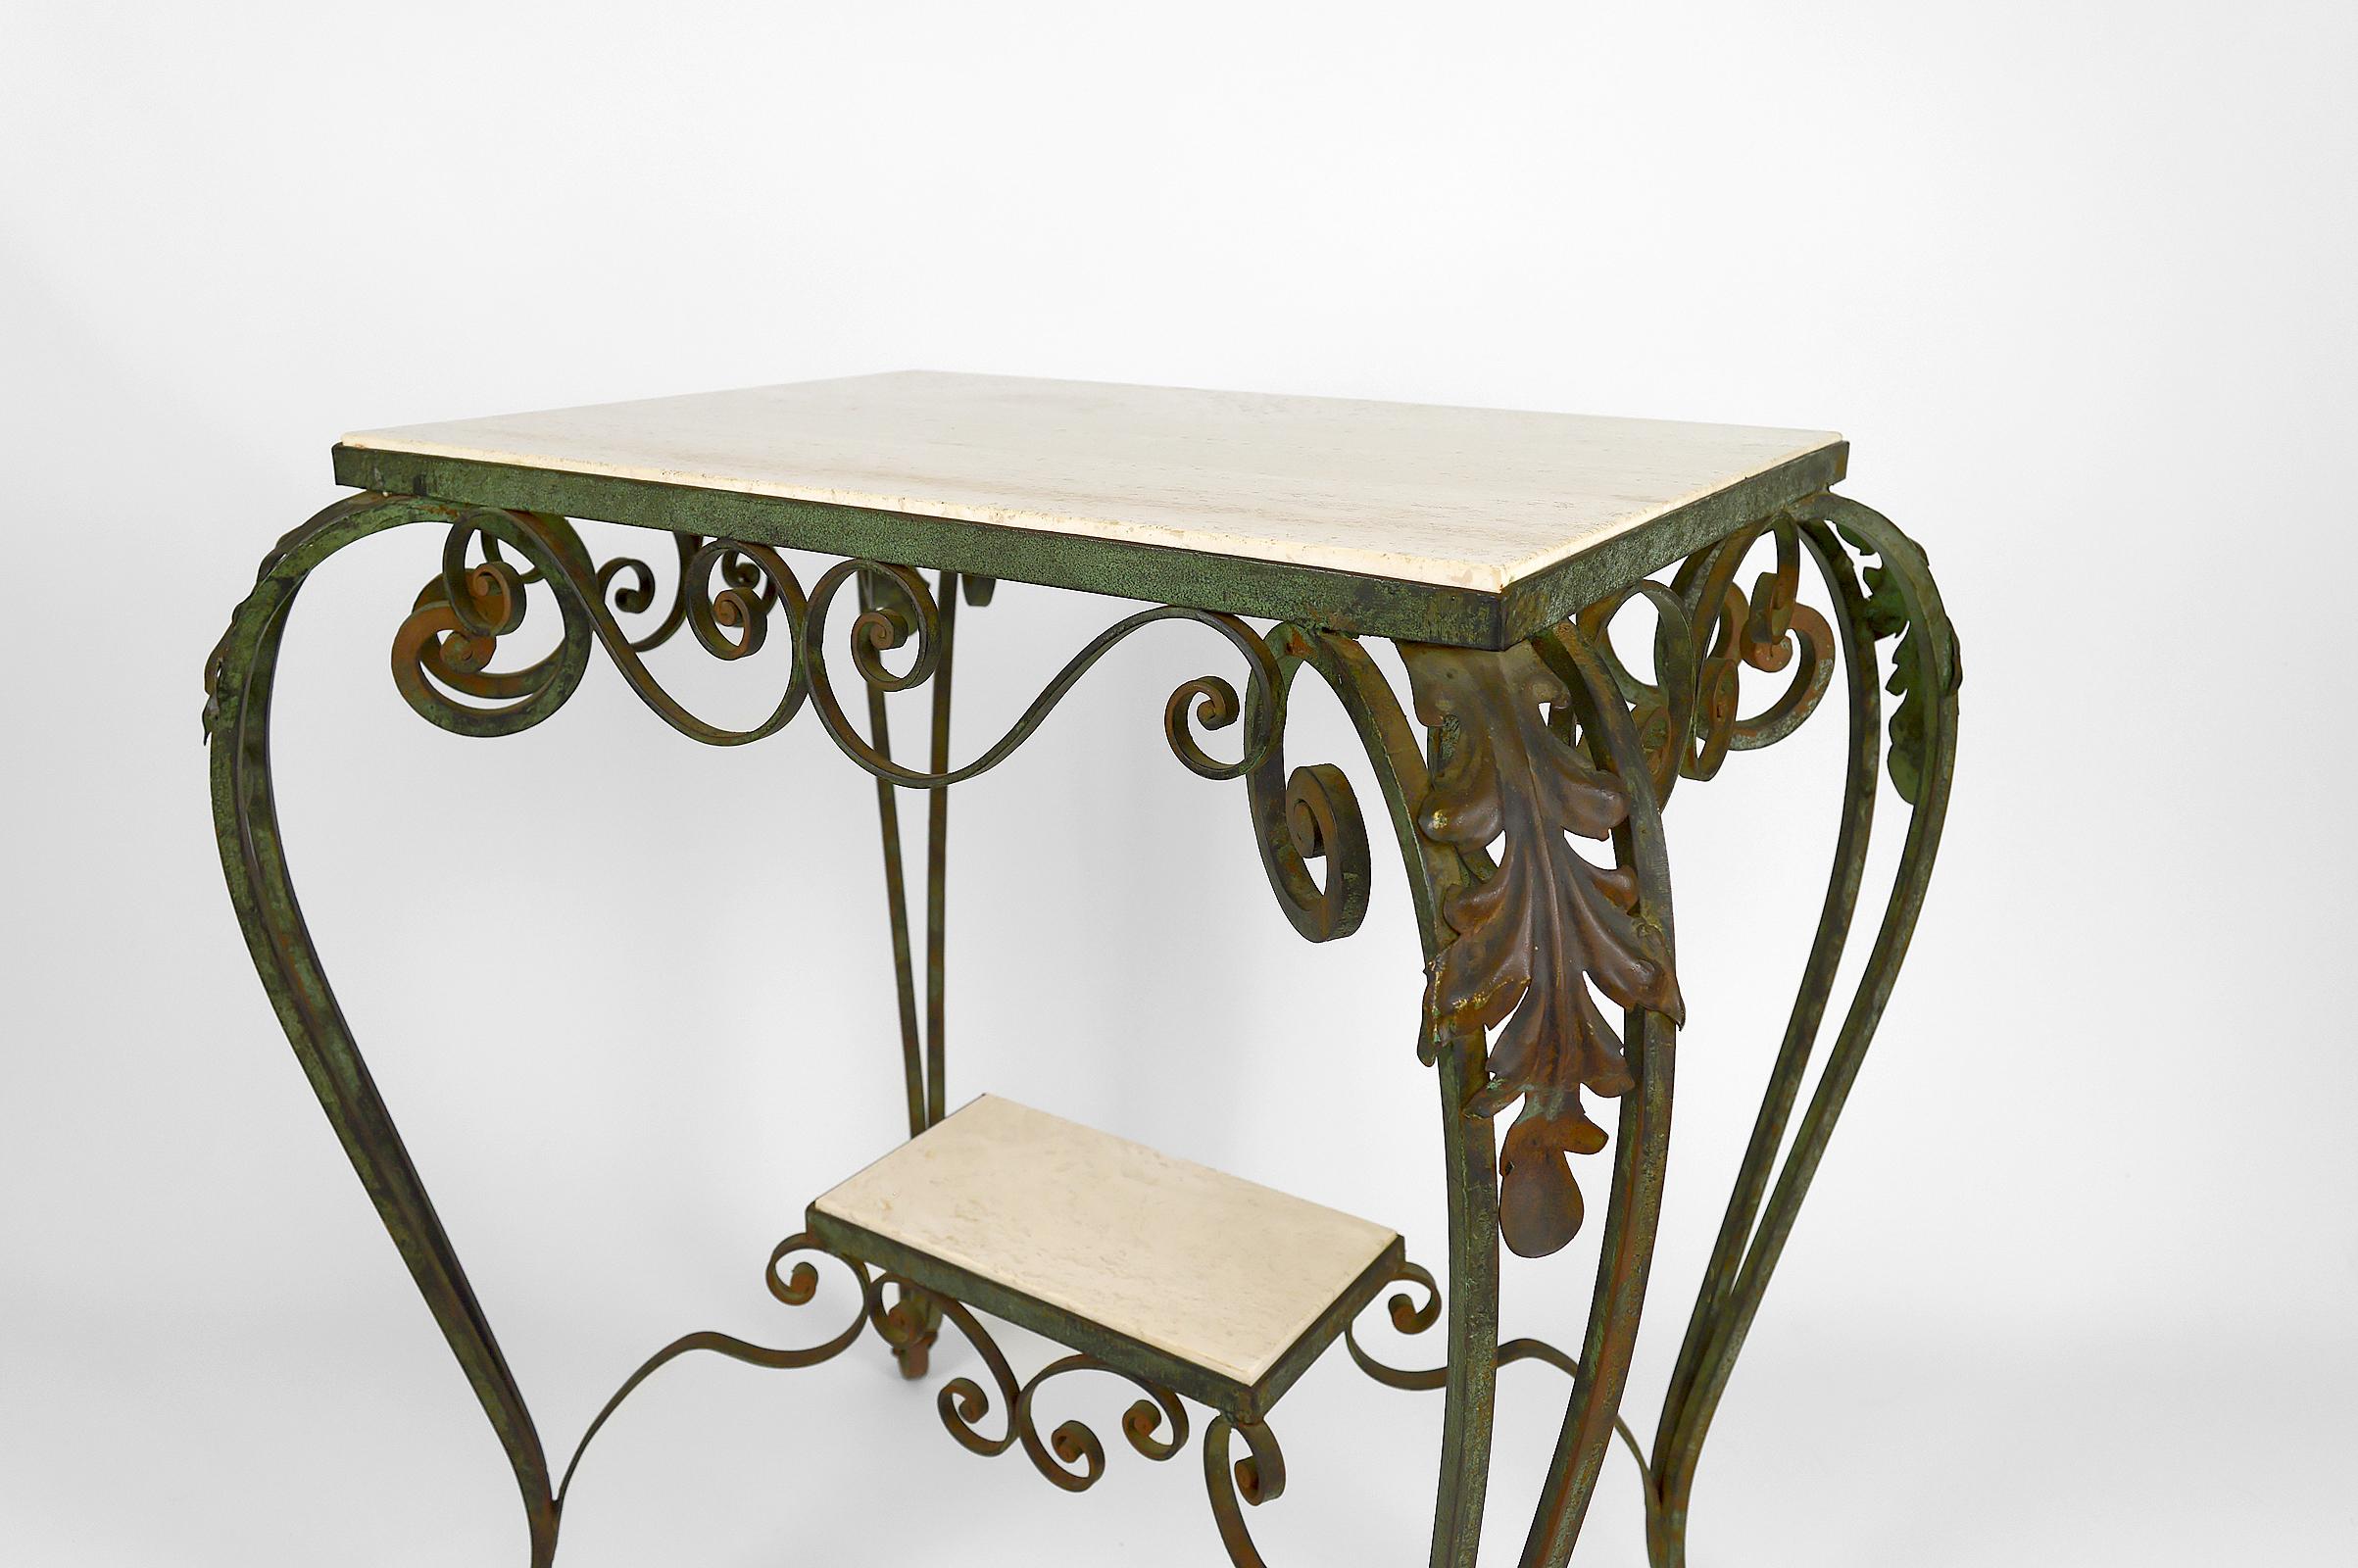 Art Deco Rolling Service Table in Wrought Iron and Travertine, France, 1940s For Sale 9